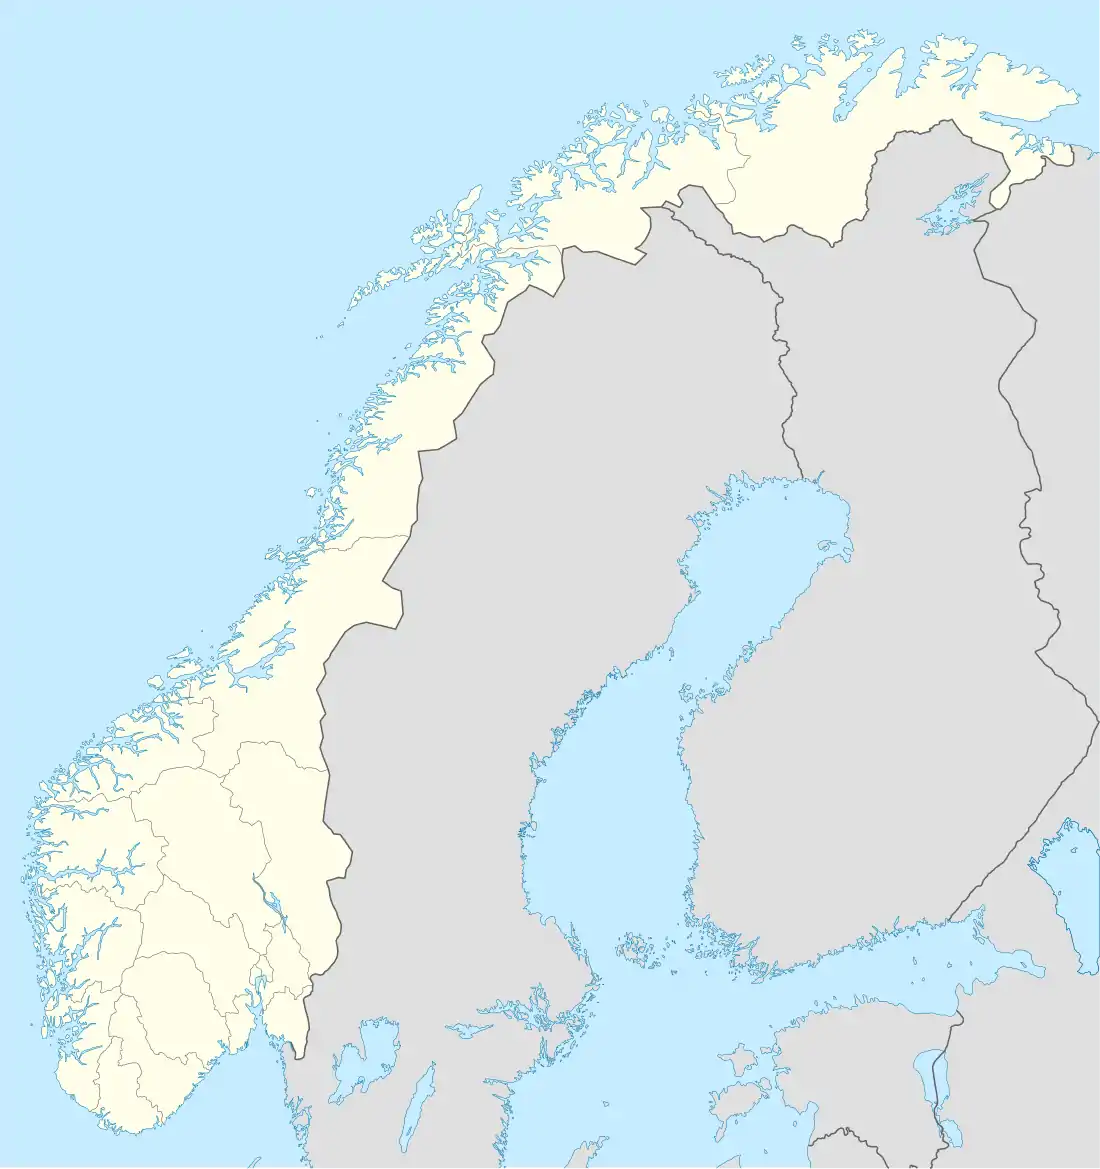 Haus is located in Norway